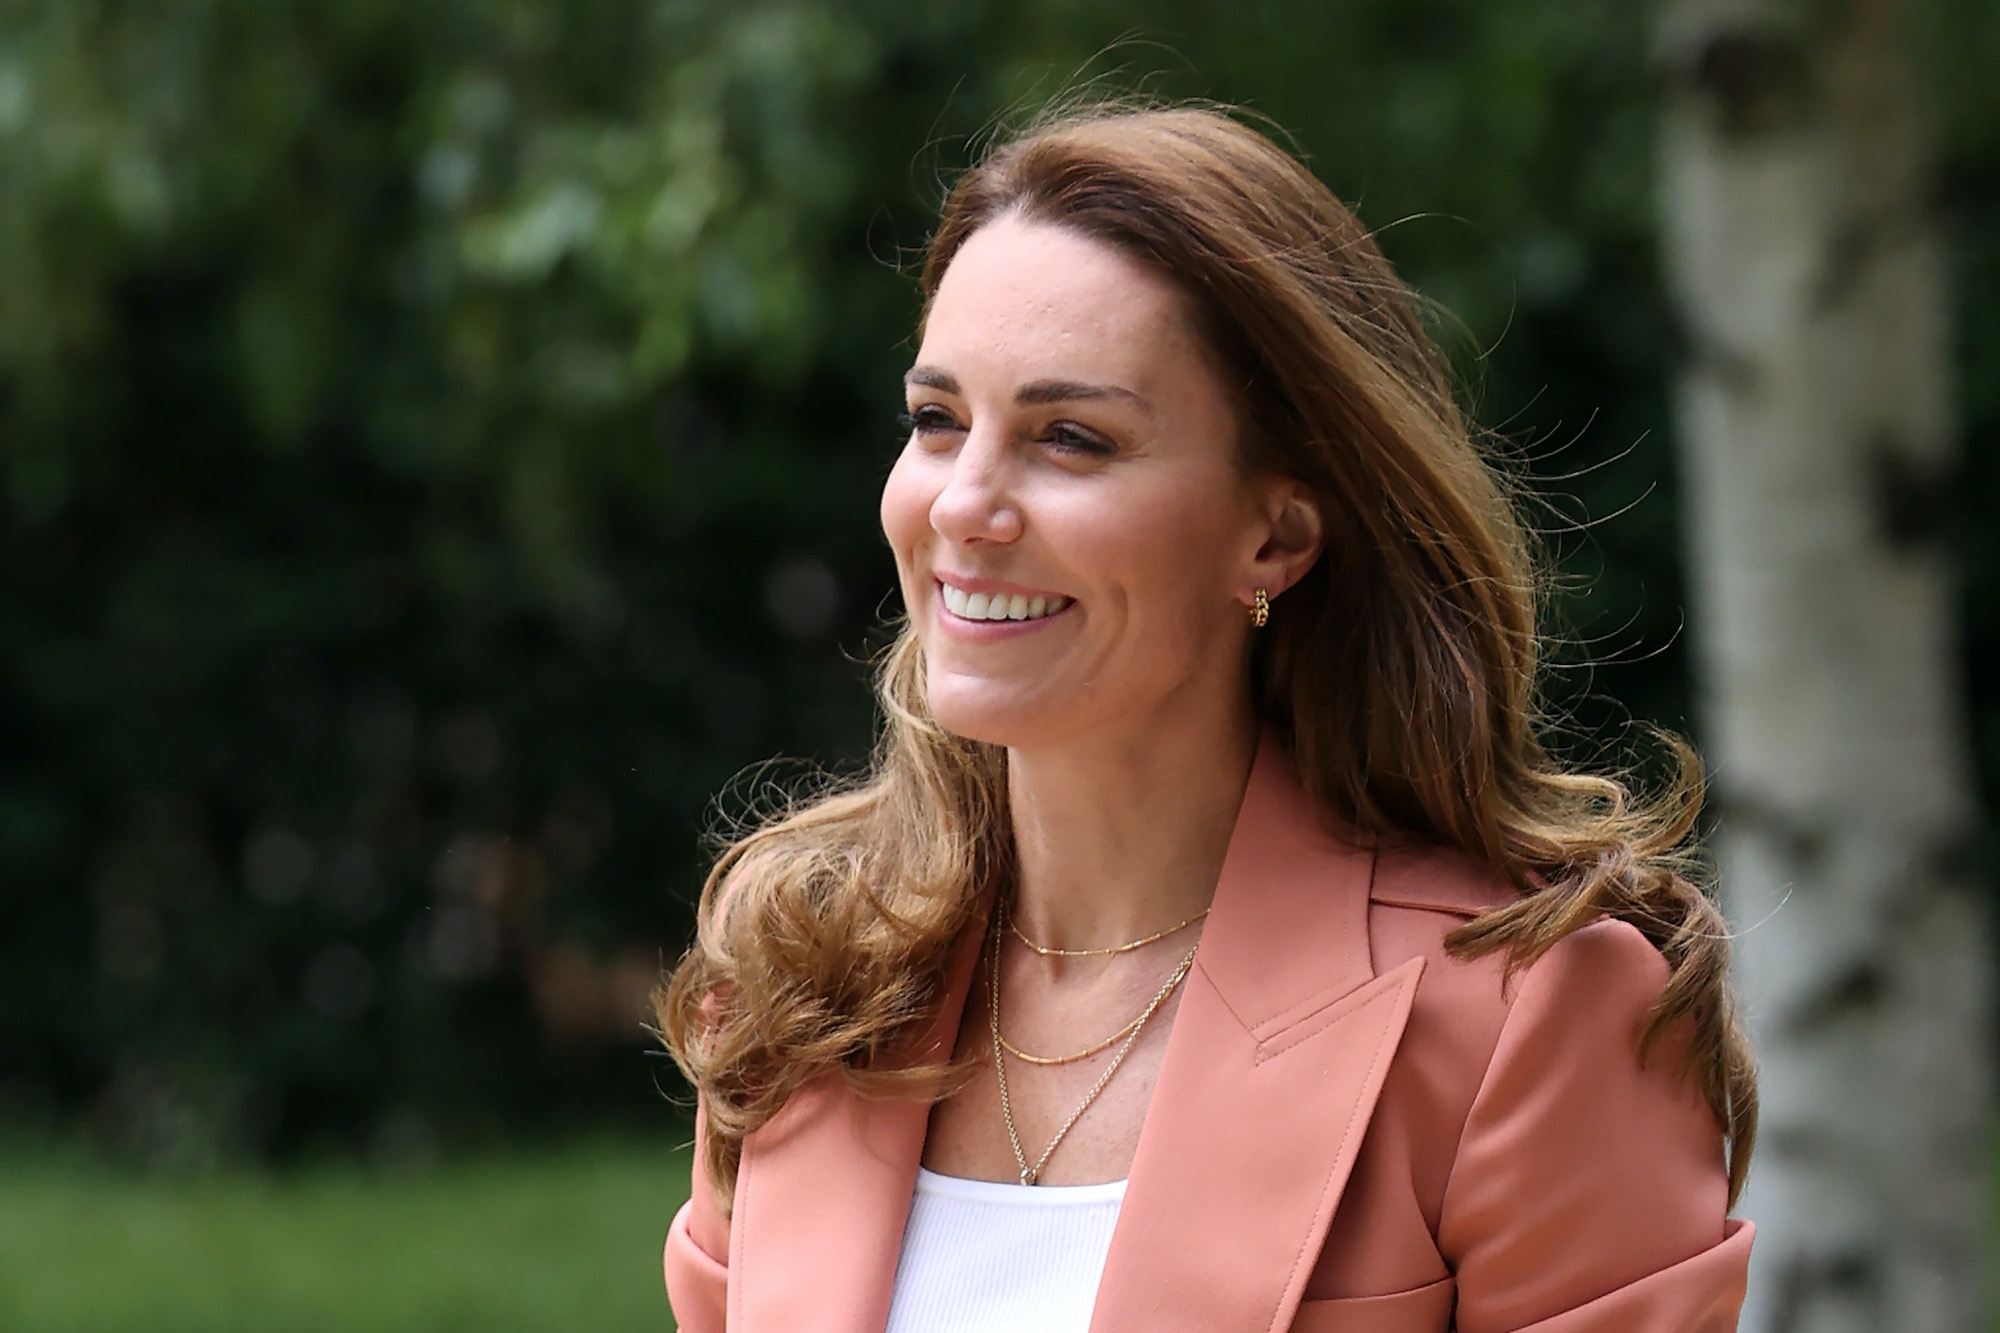 Duchess of Cambridge Kate Middleton smiling, looking off camera